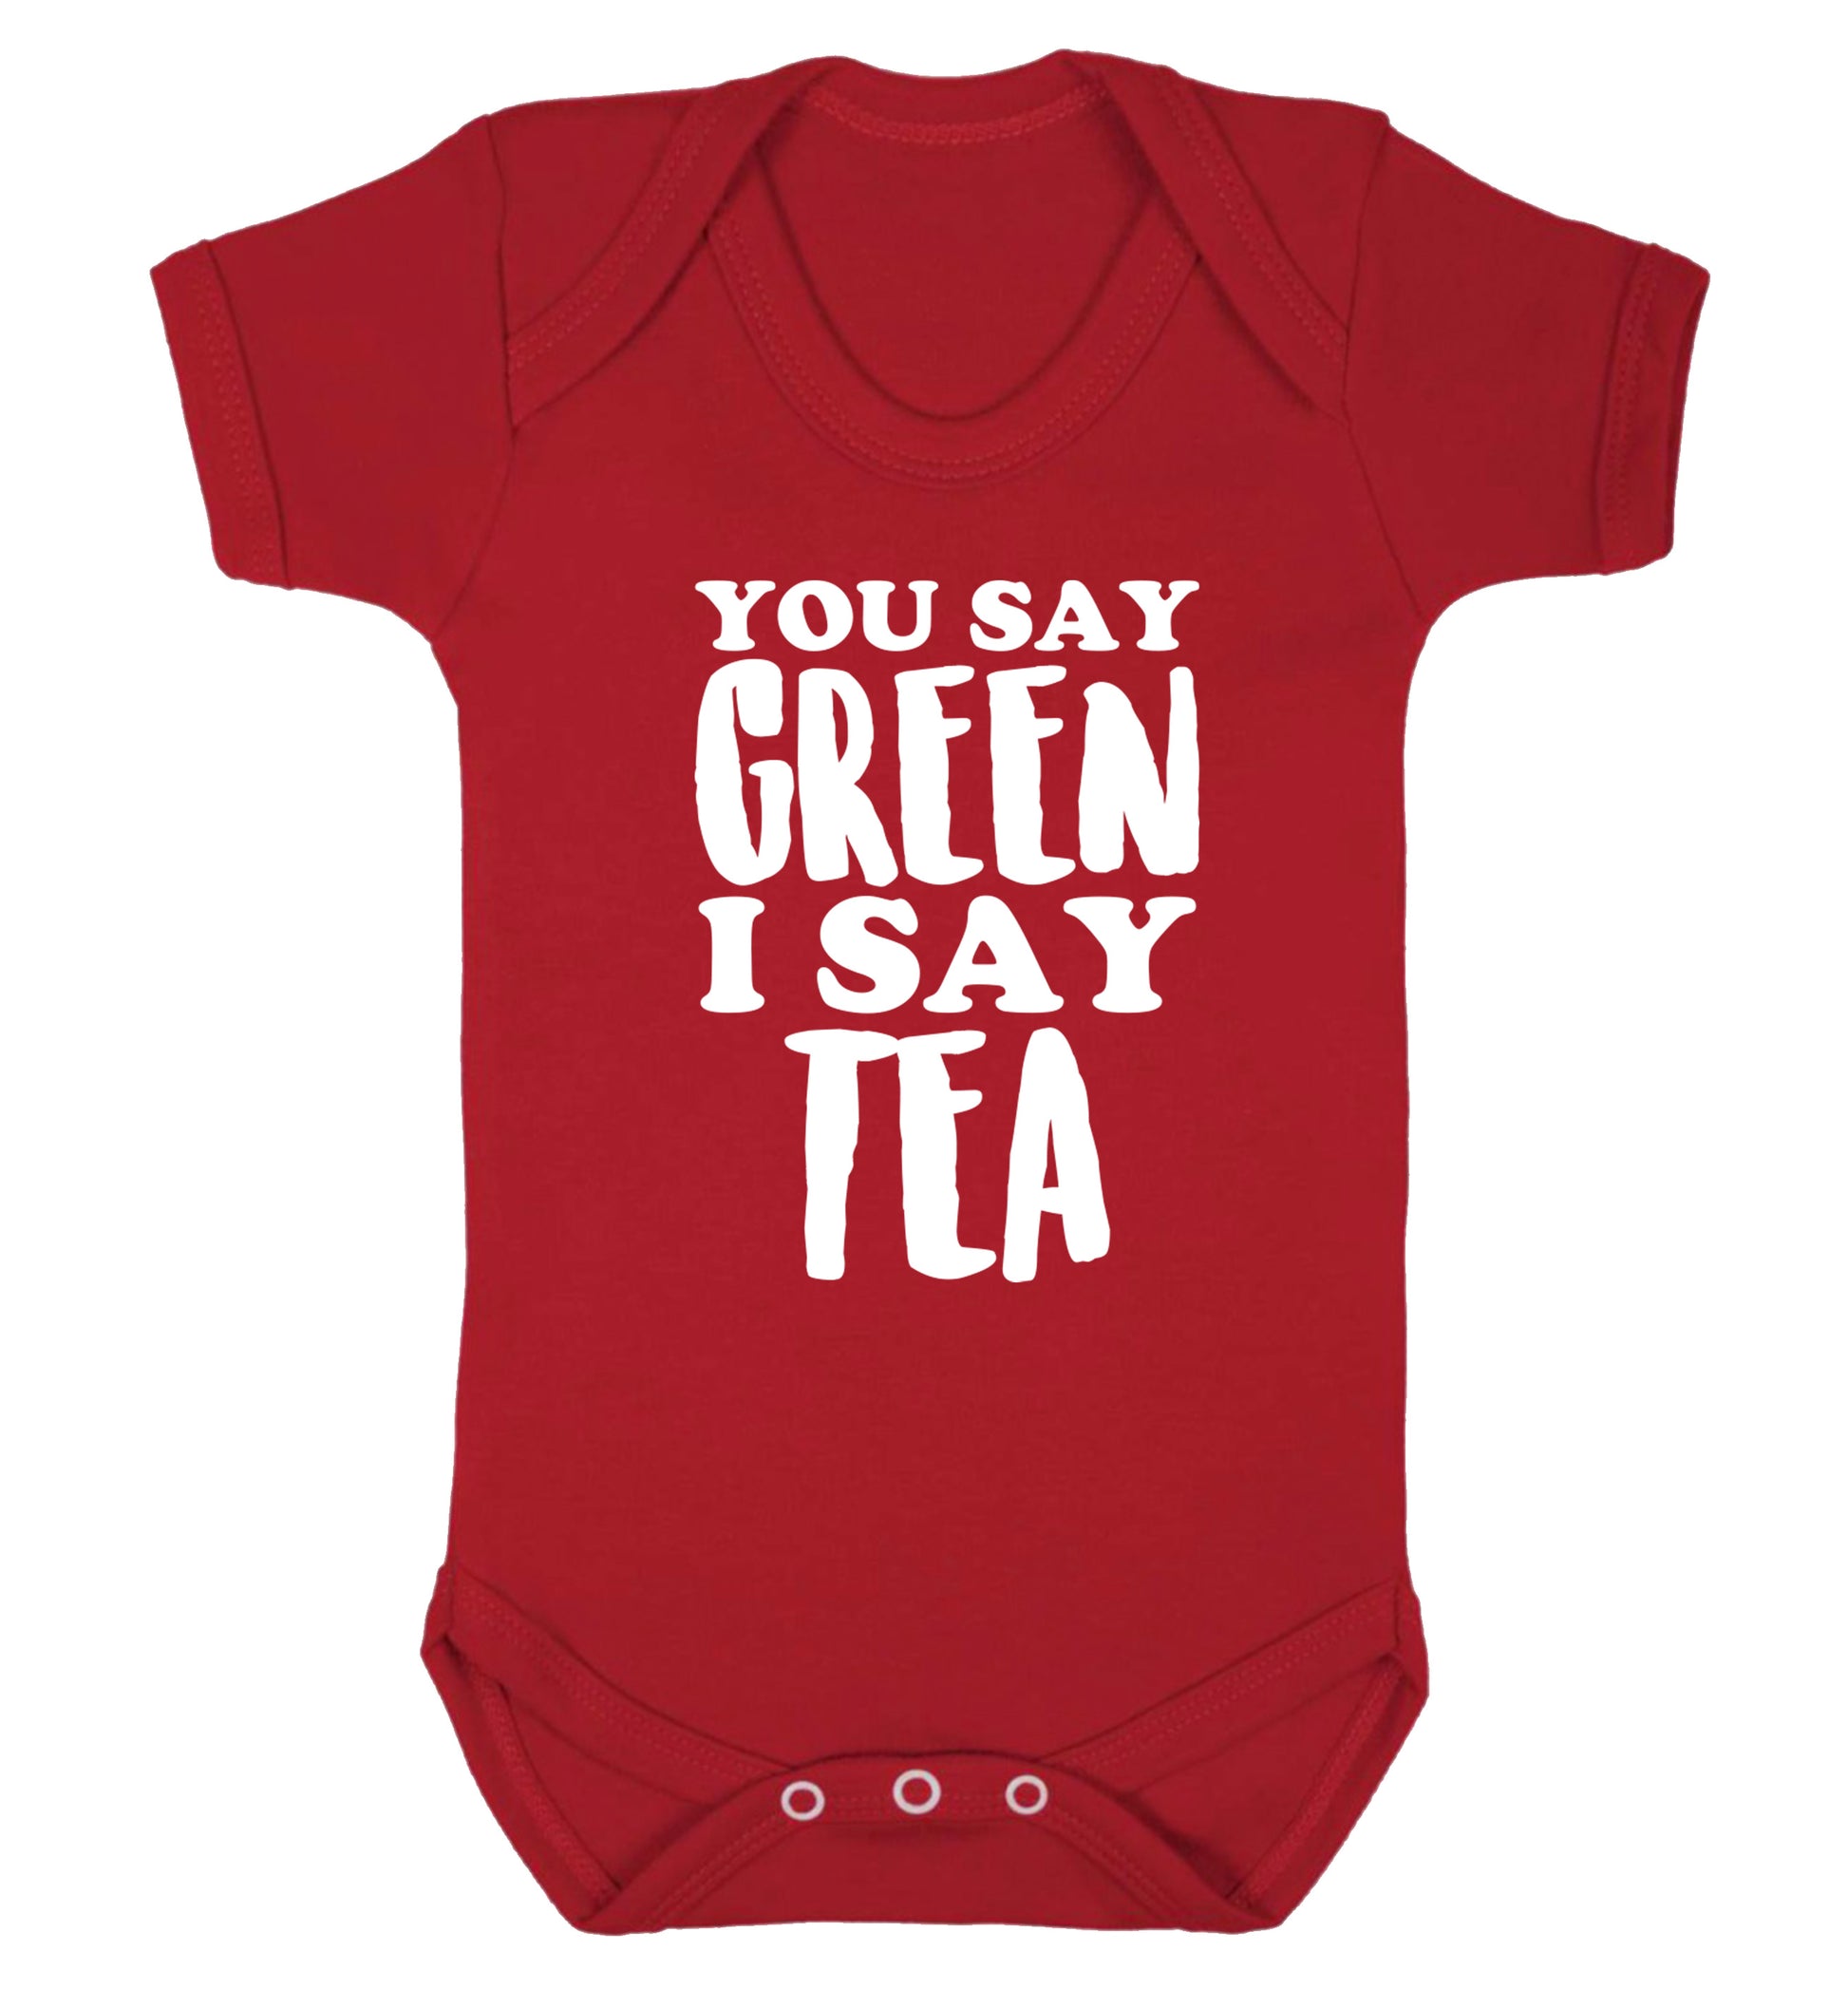 You say green I say tea! Baby Vest red 18-24 months